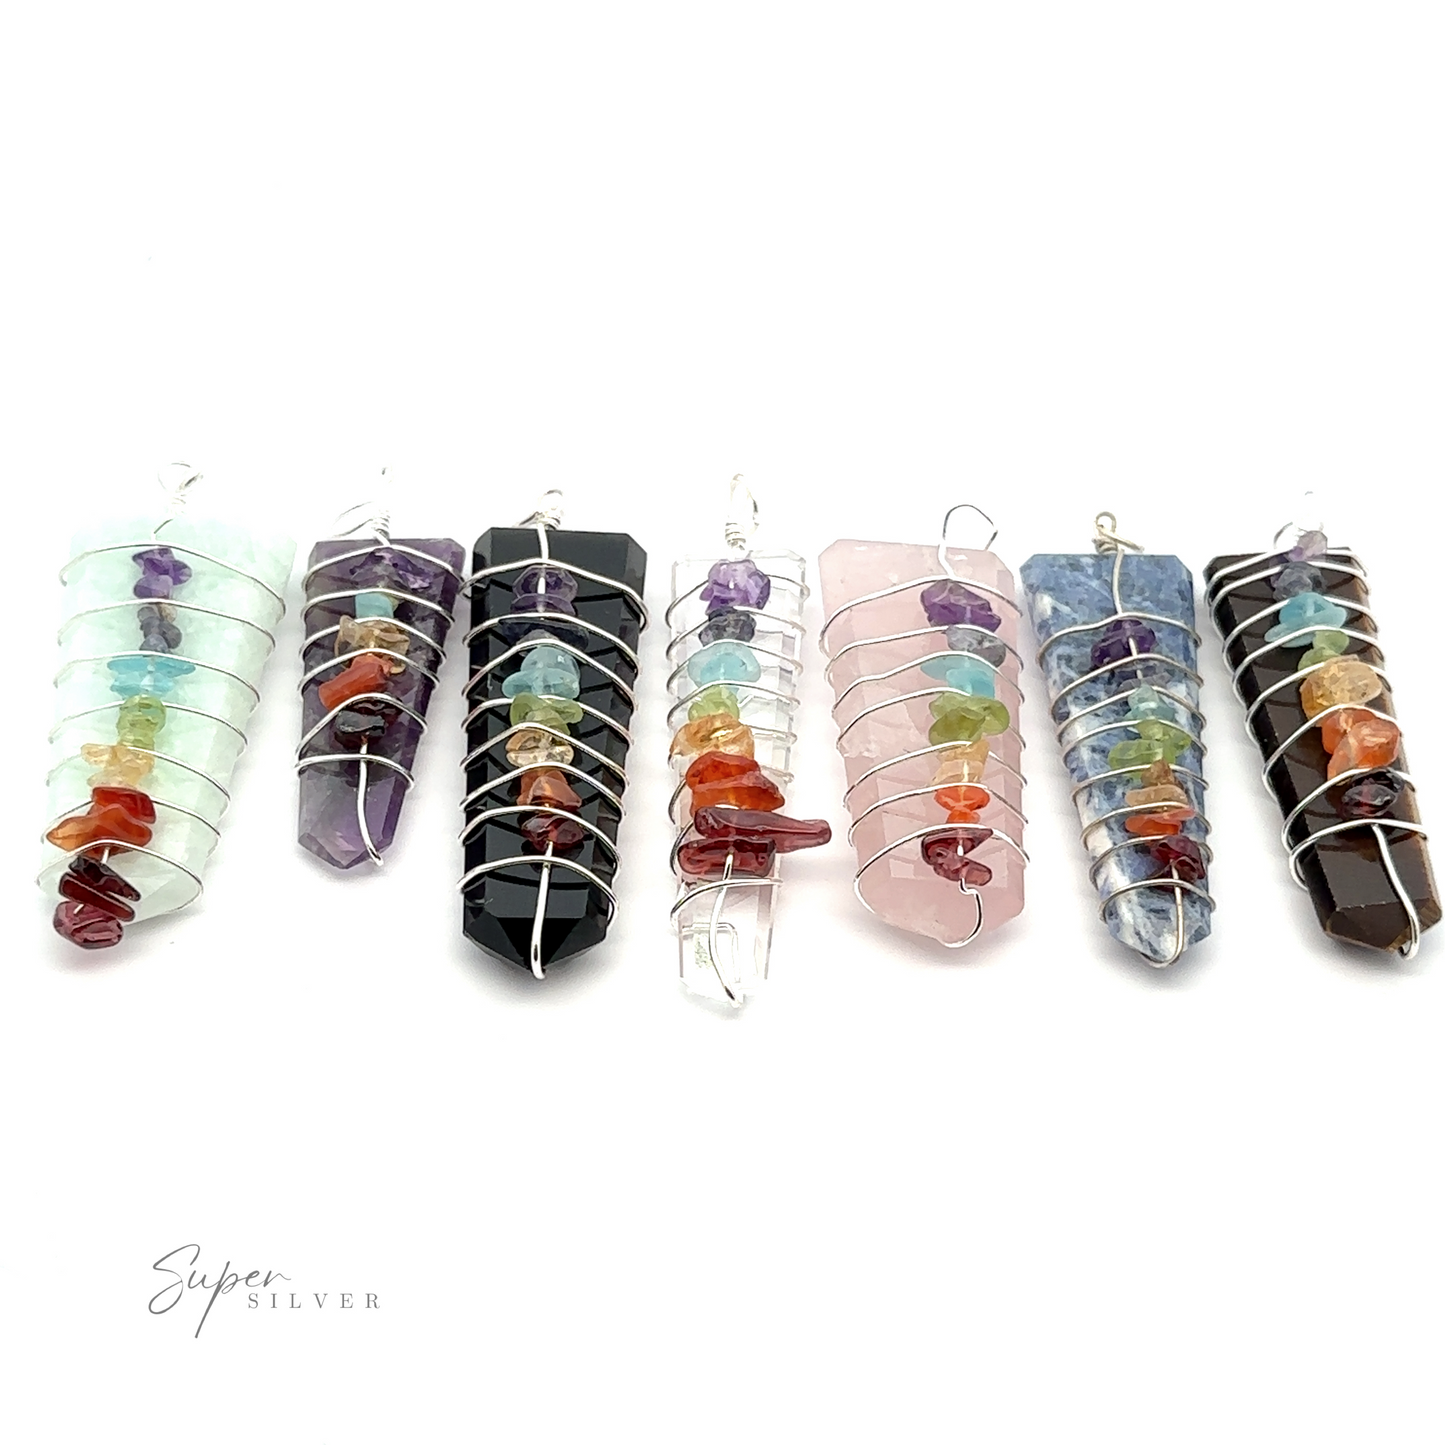 Seven Stone Slab Wire-Wrapped Chakra Pendants, each containing multicolored smaller chakra stones inside, are aligned in a row against a white background.